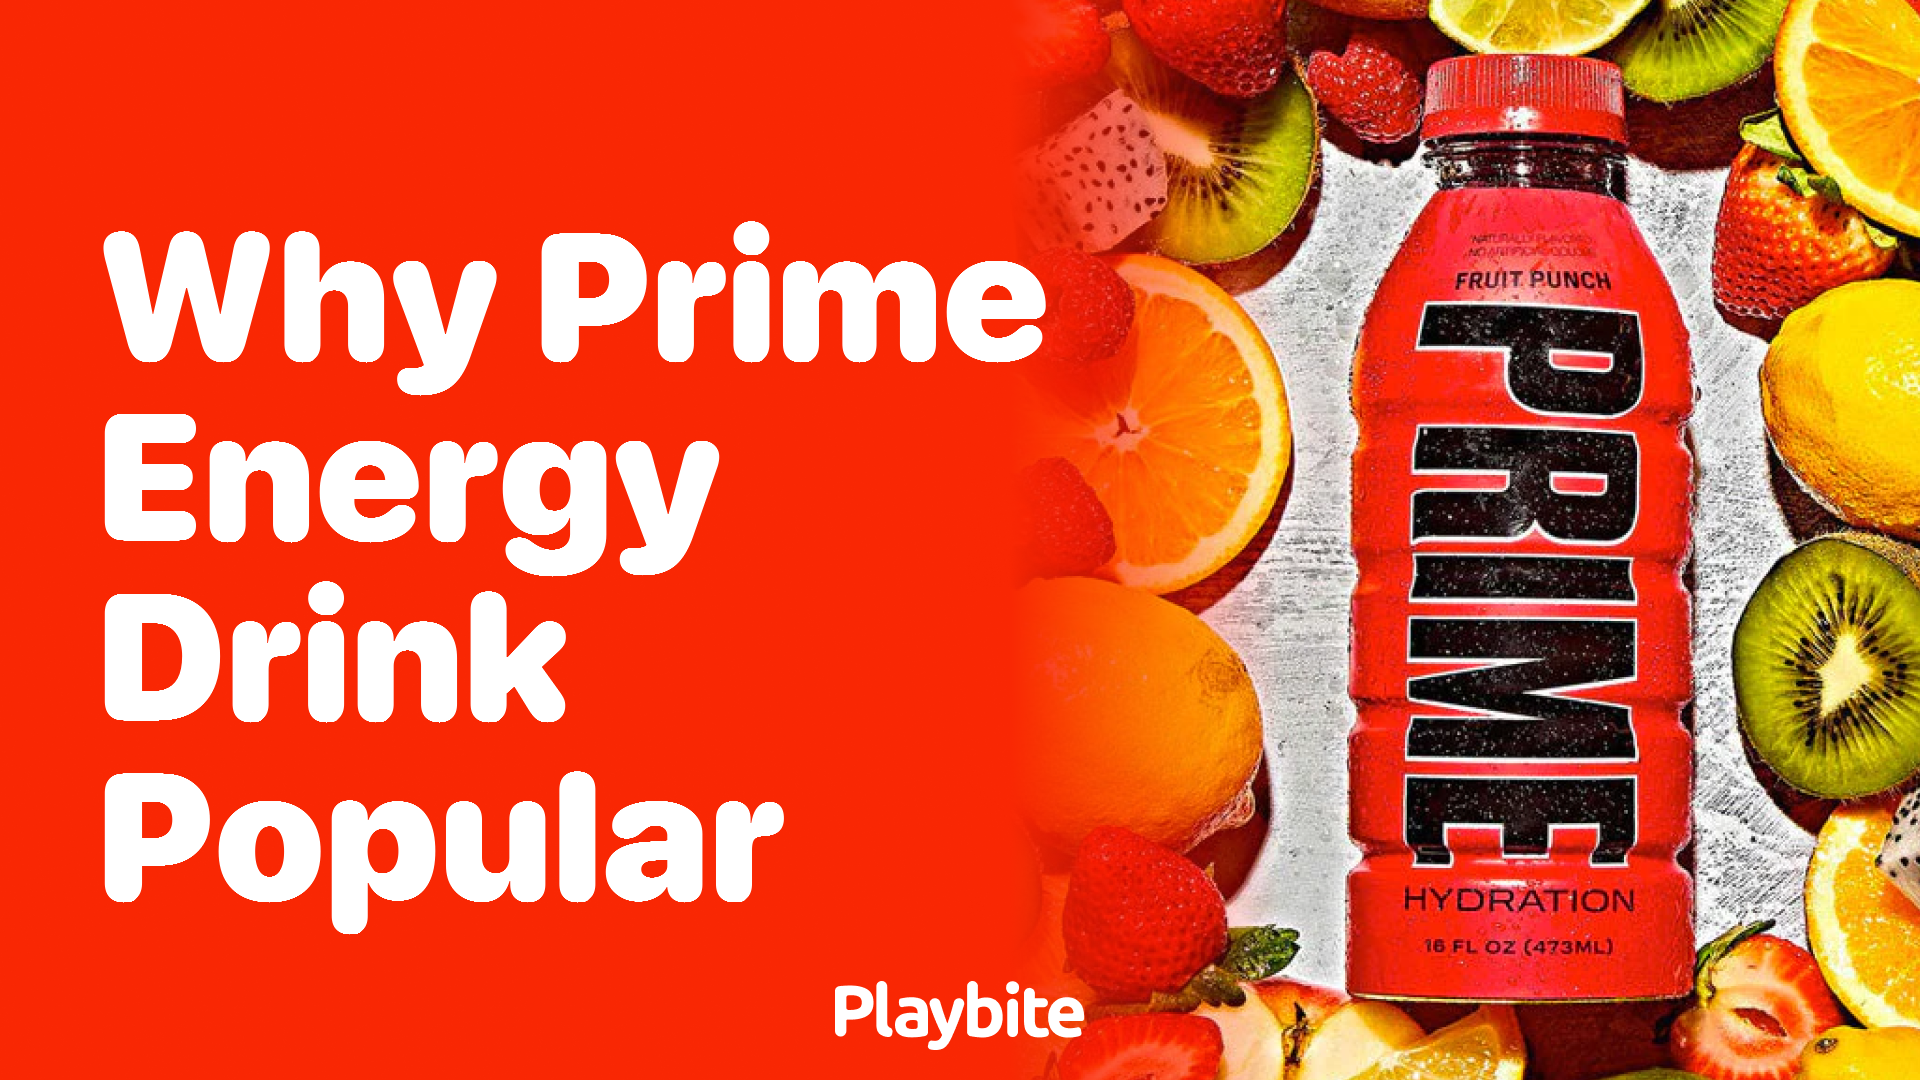 Why Is Prime Energy Drink So Popular?